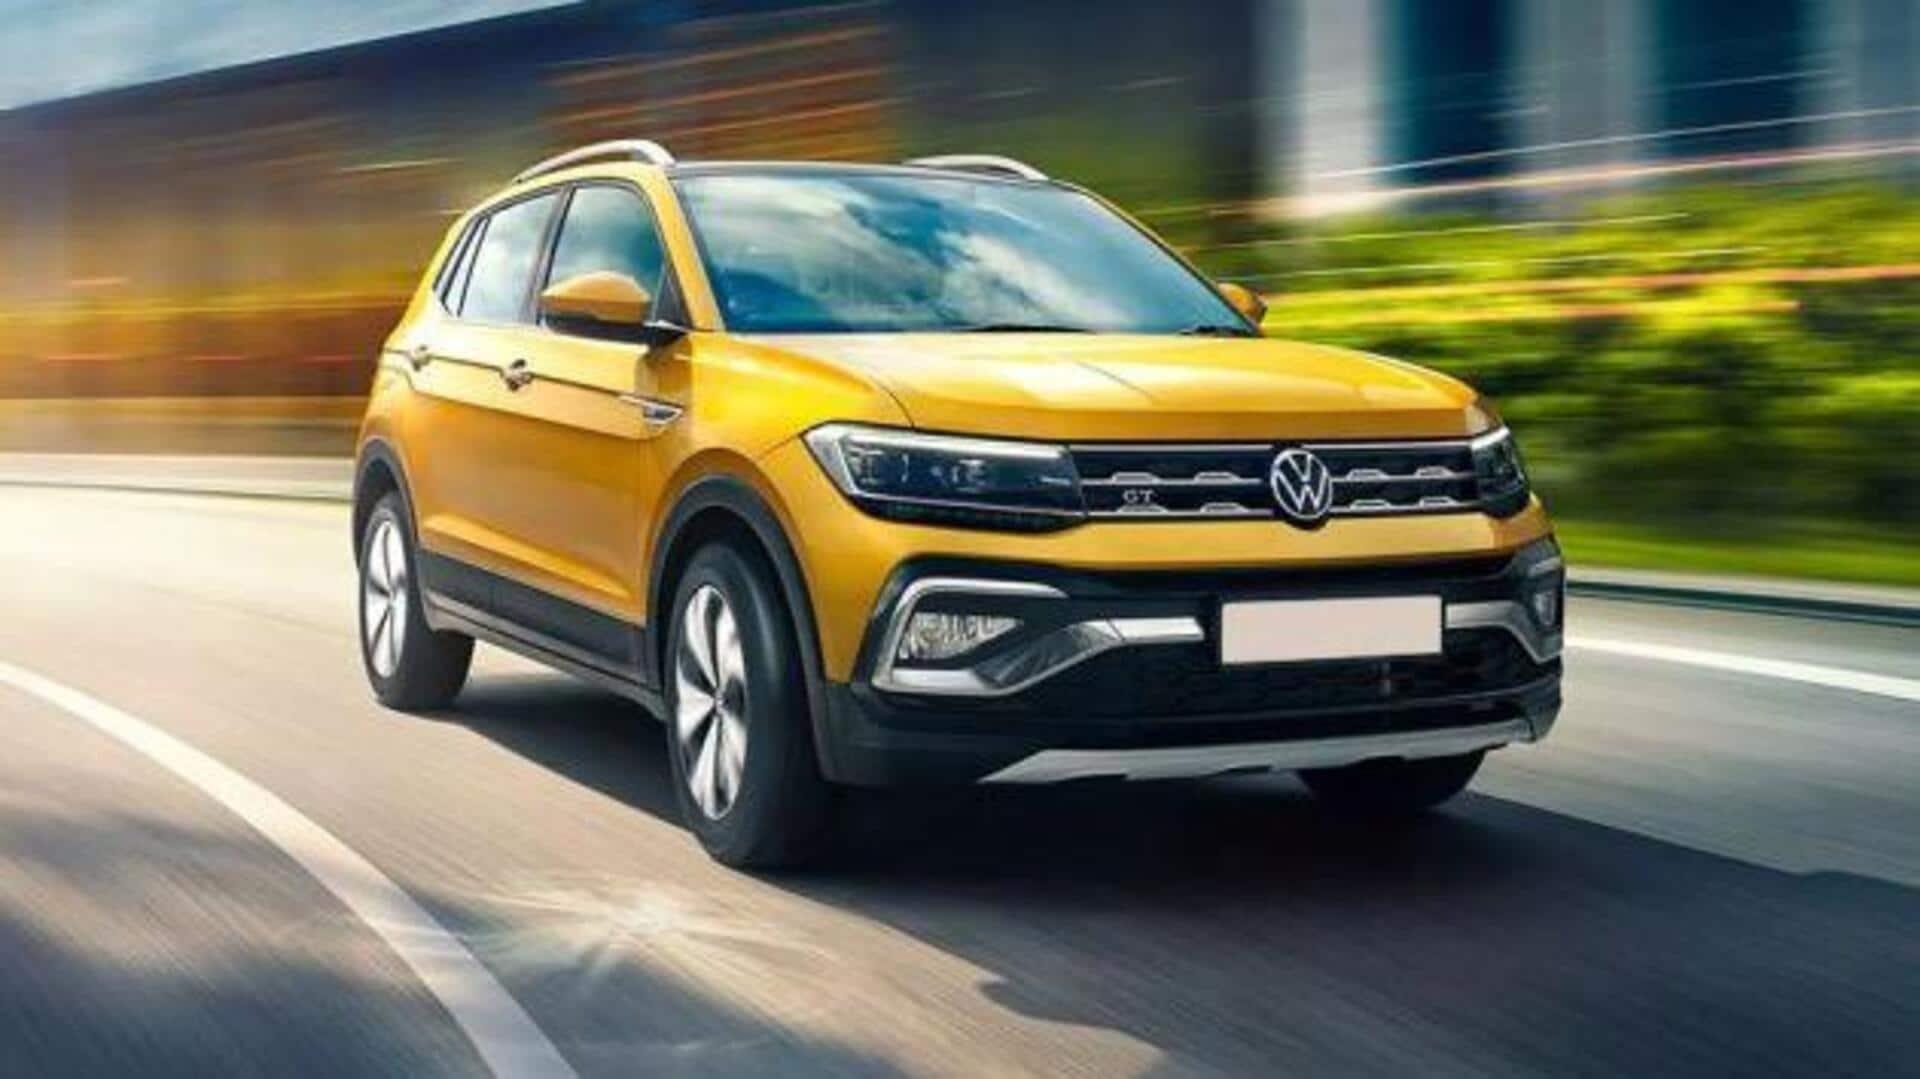 Volkswagen Taigun becomes costlier in India: Check new prices